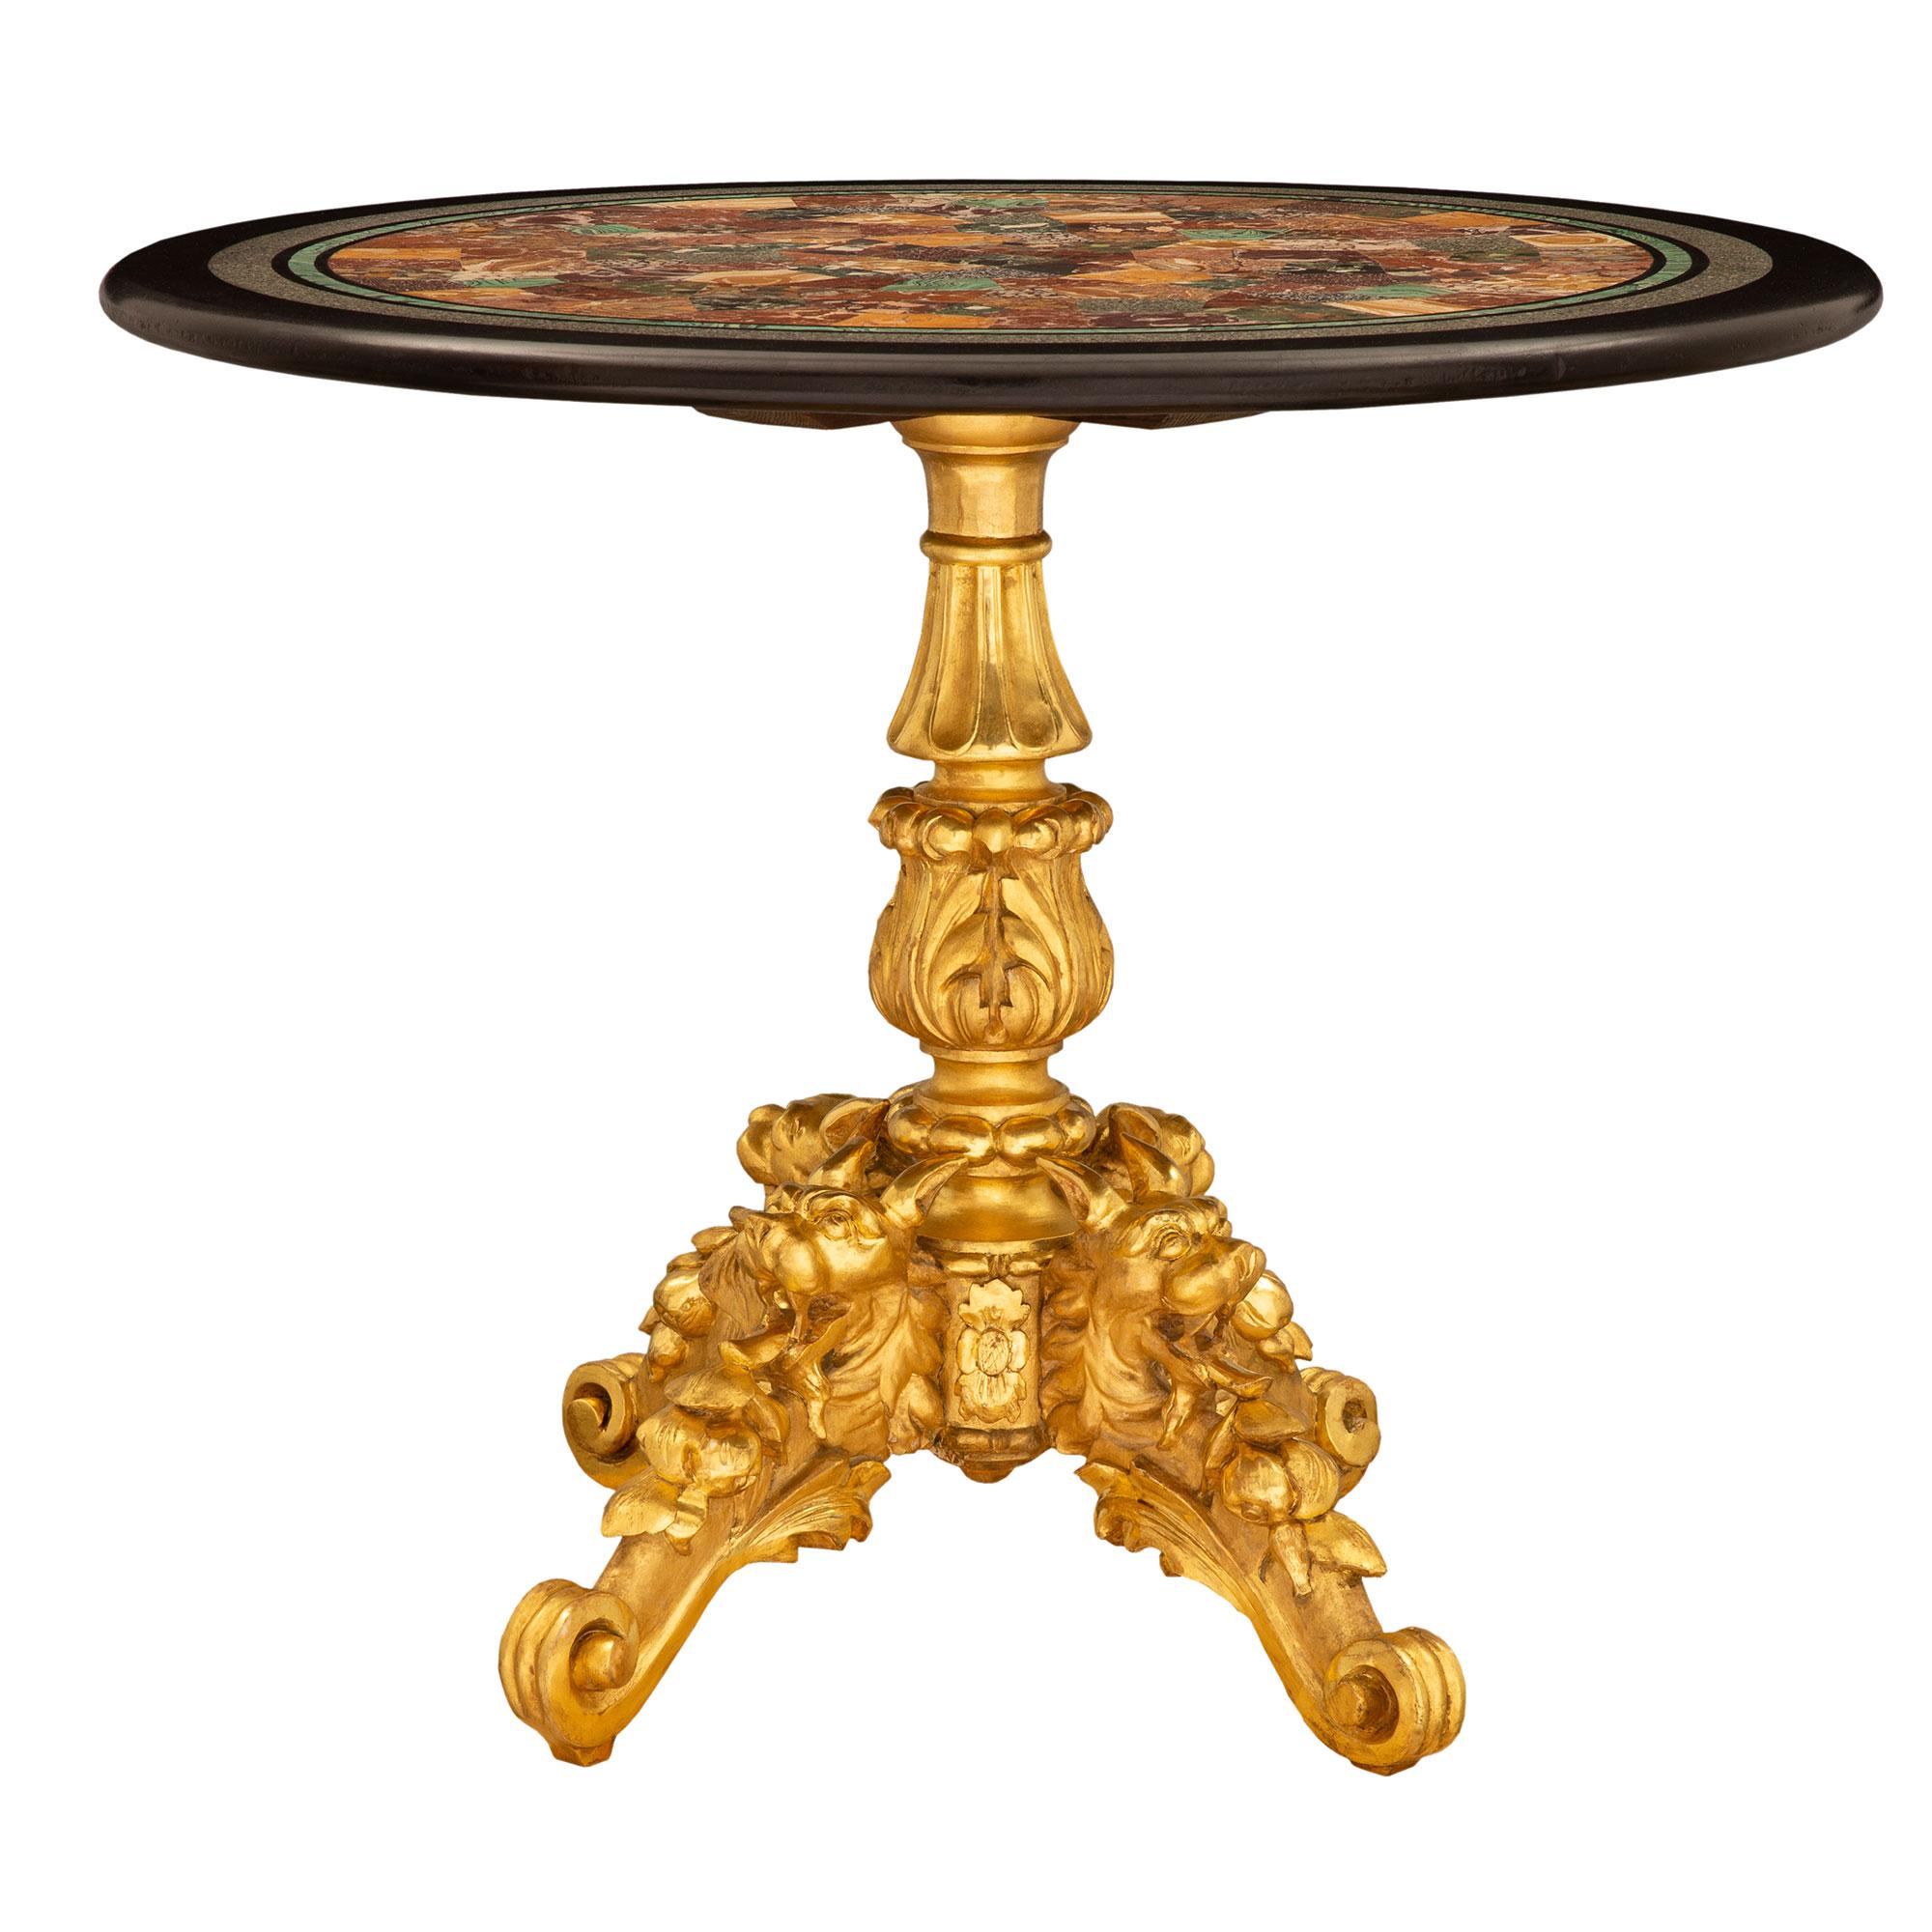 A superb and most decorative Italian 19th century giltwood and specimen marble side/center table. The circular table is raised by a striking and exquisitely carved giltwood base with elegant scrolled foliate designs and impressive finely detailed